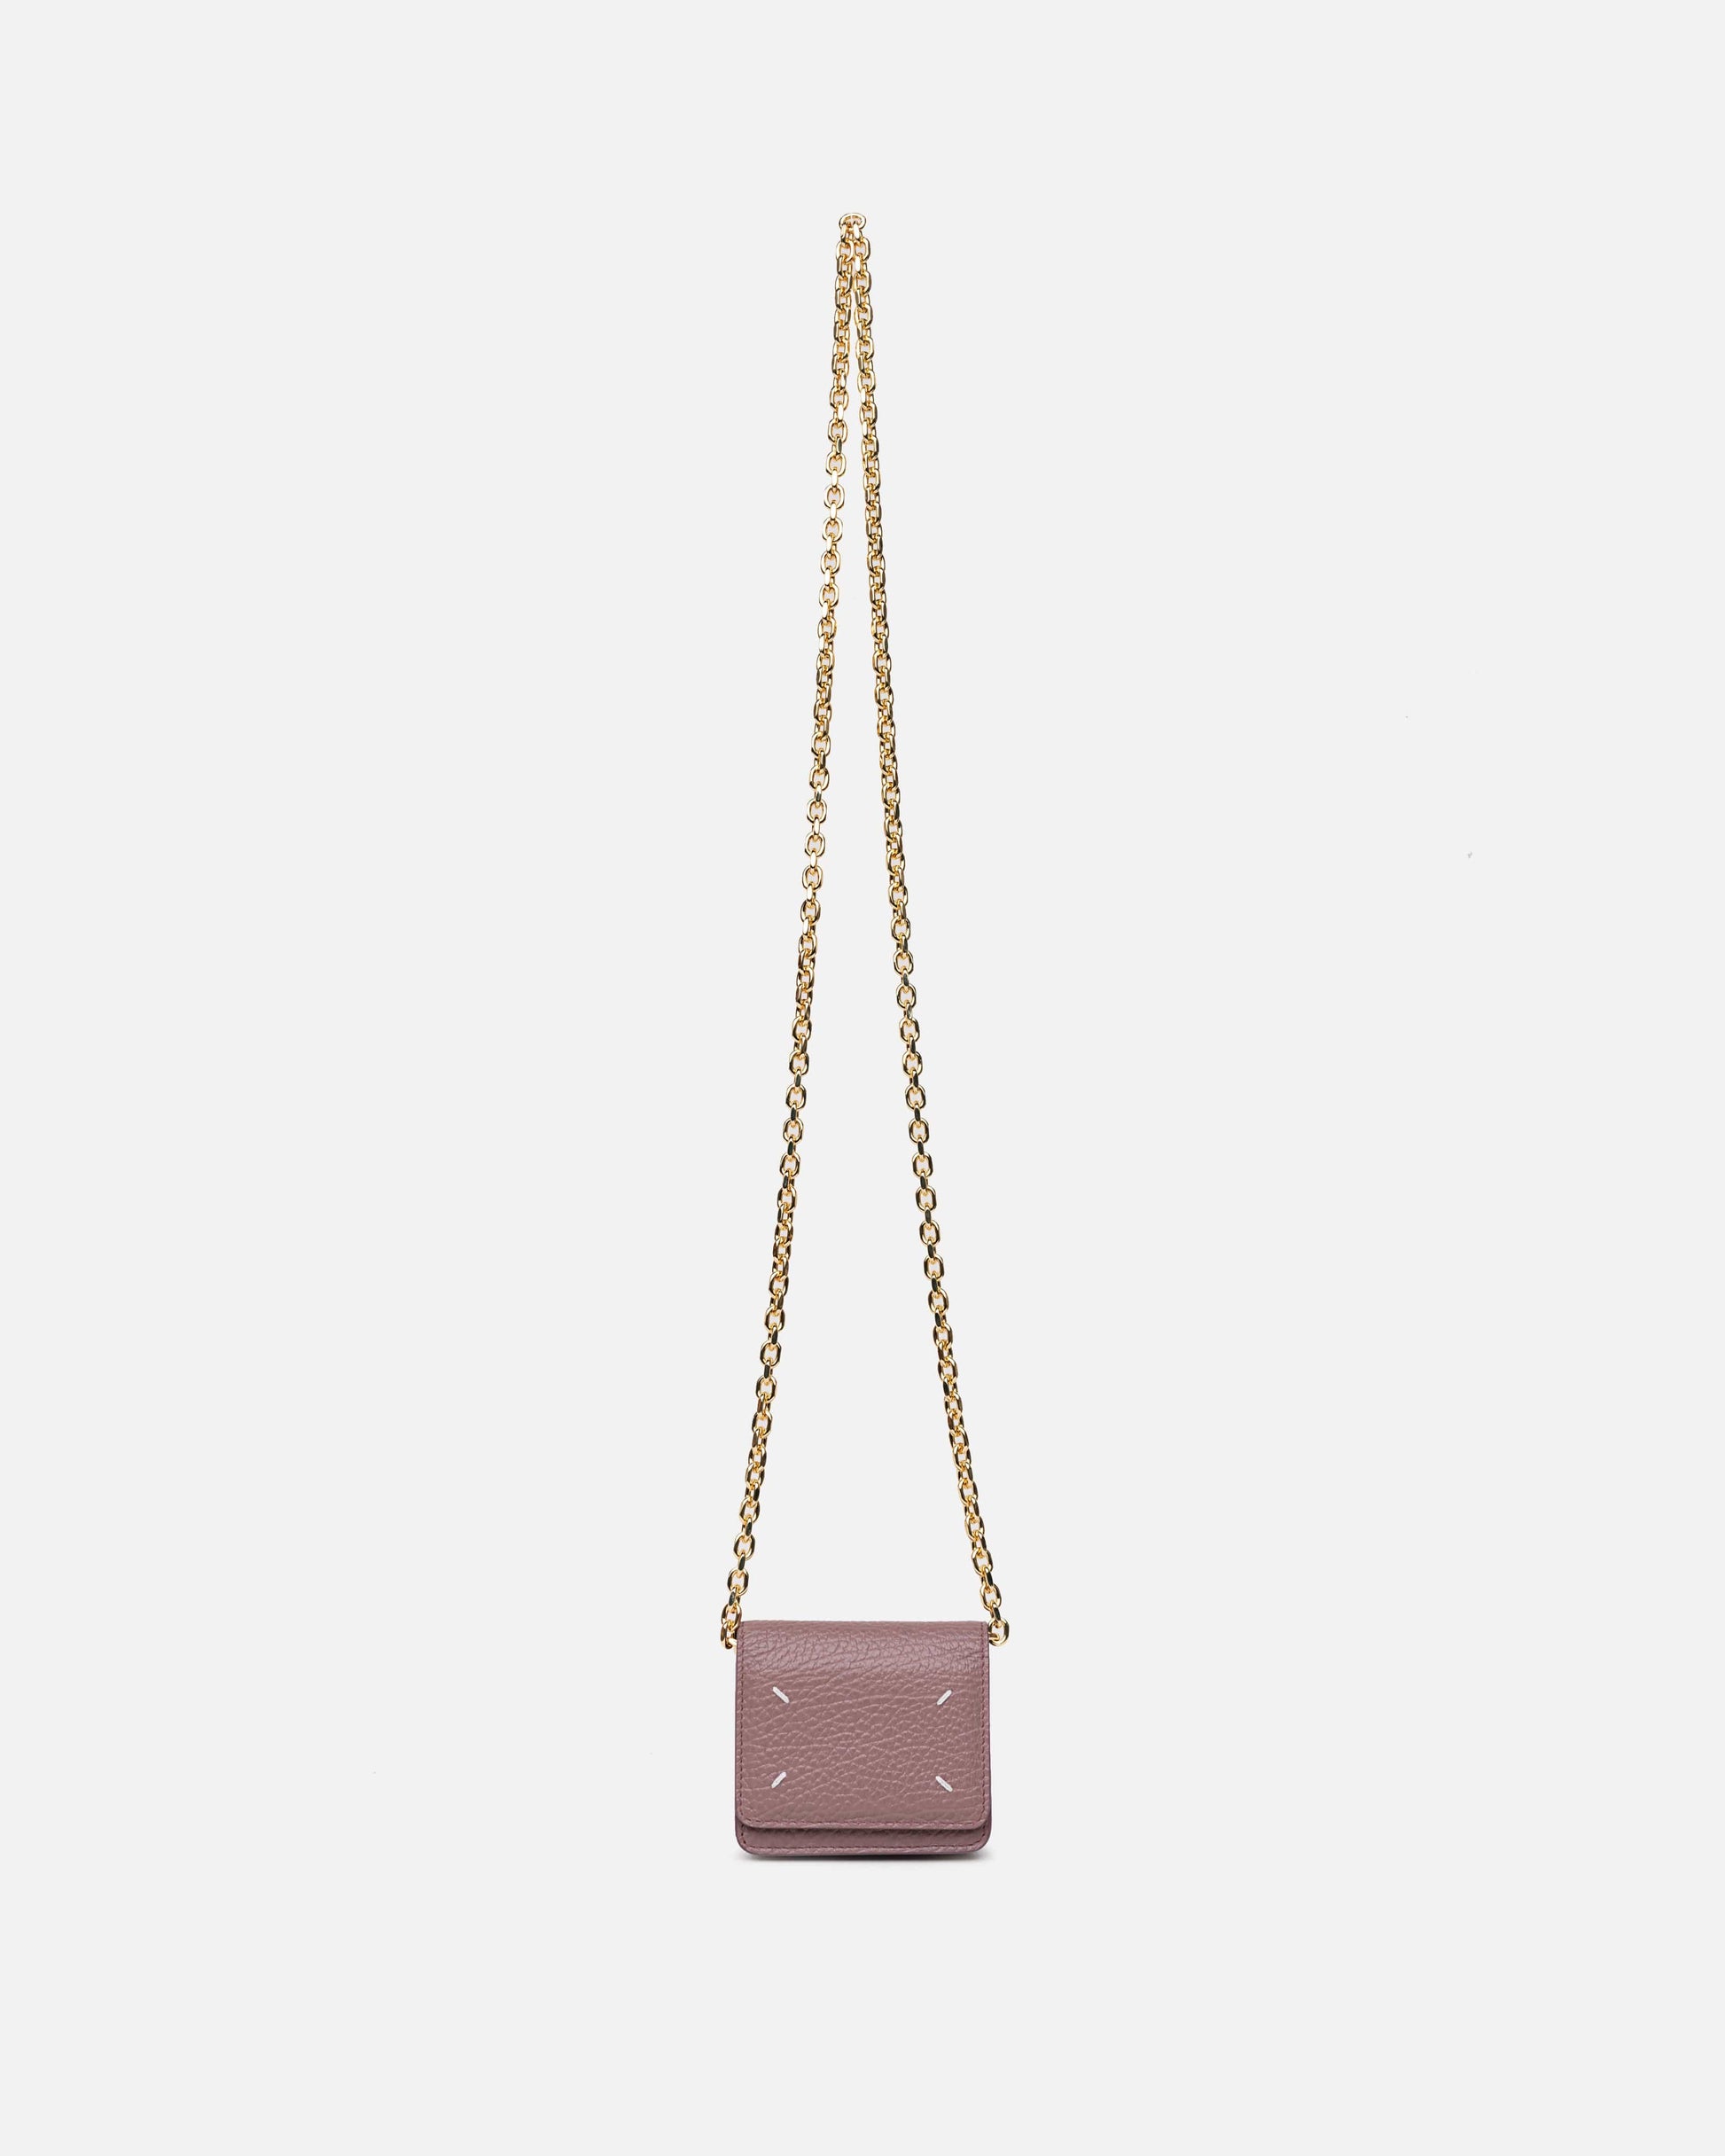 Maison Margiela Leather Goods Small Chain Wallet in Pink